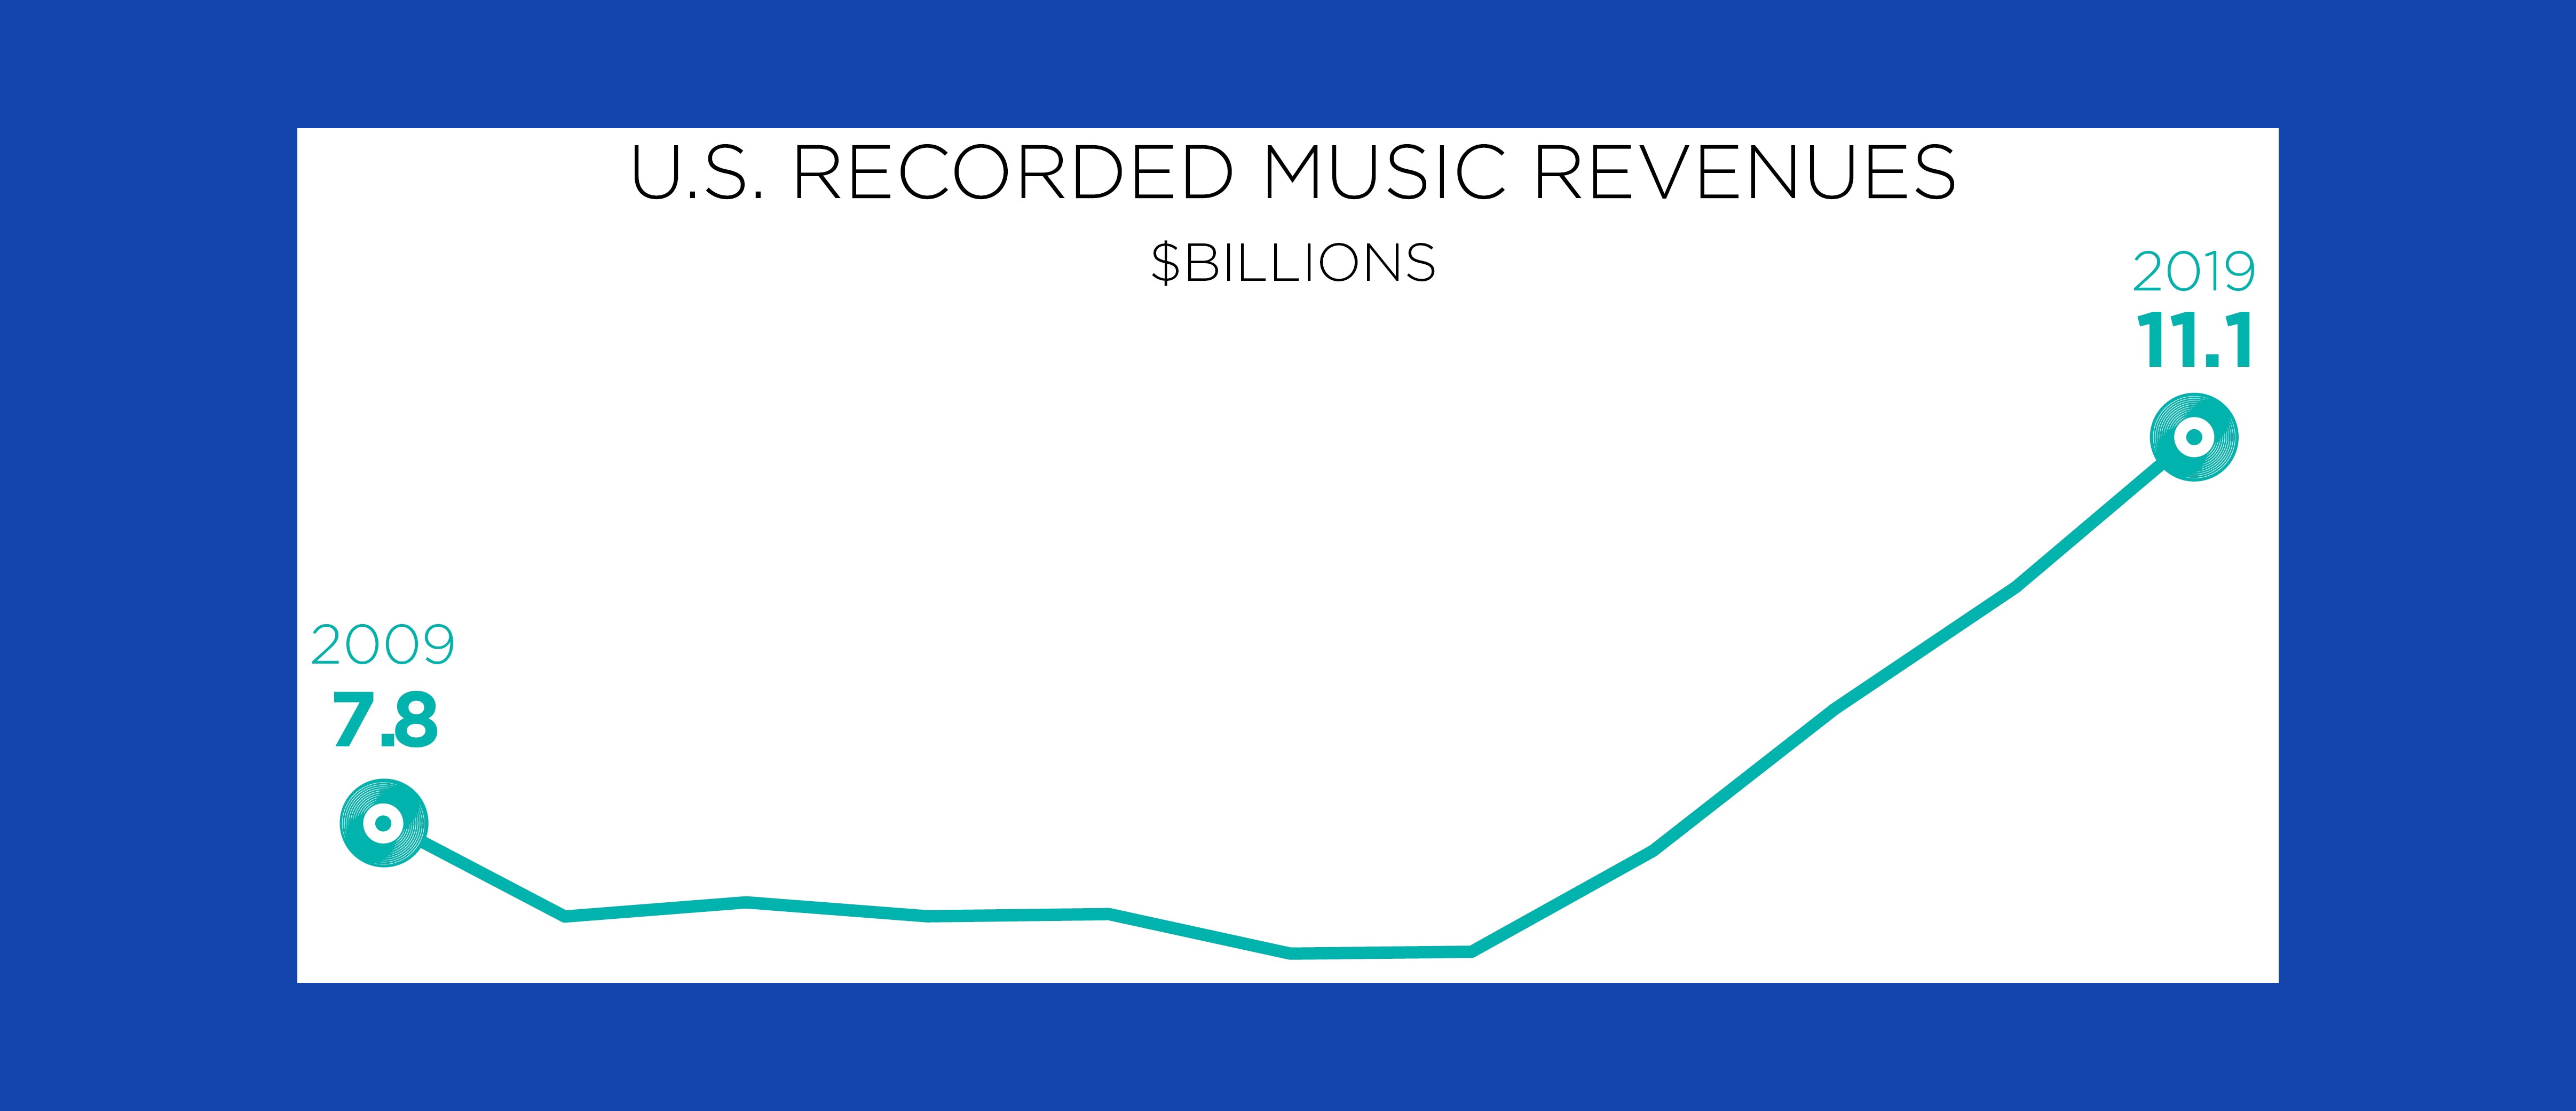 Streaming made nearly 4/5ths of US recorded music revenues in 2019